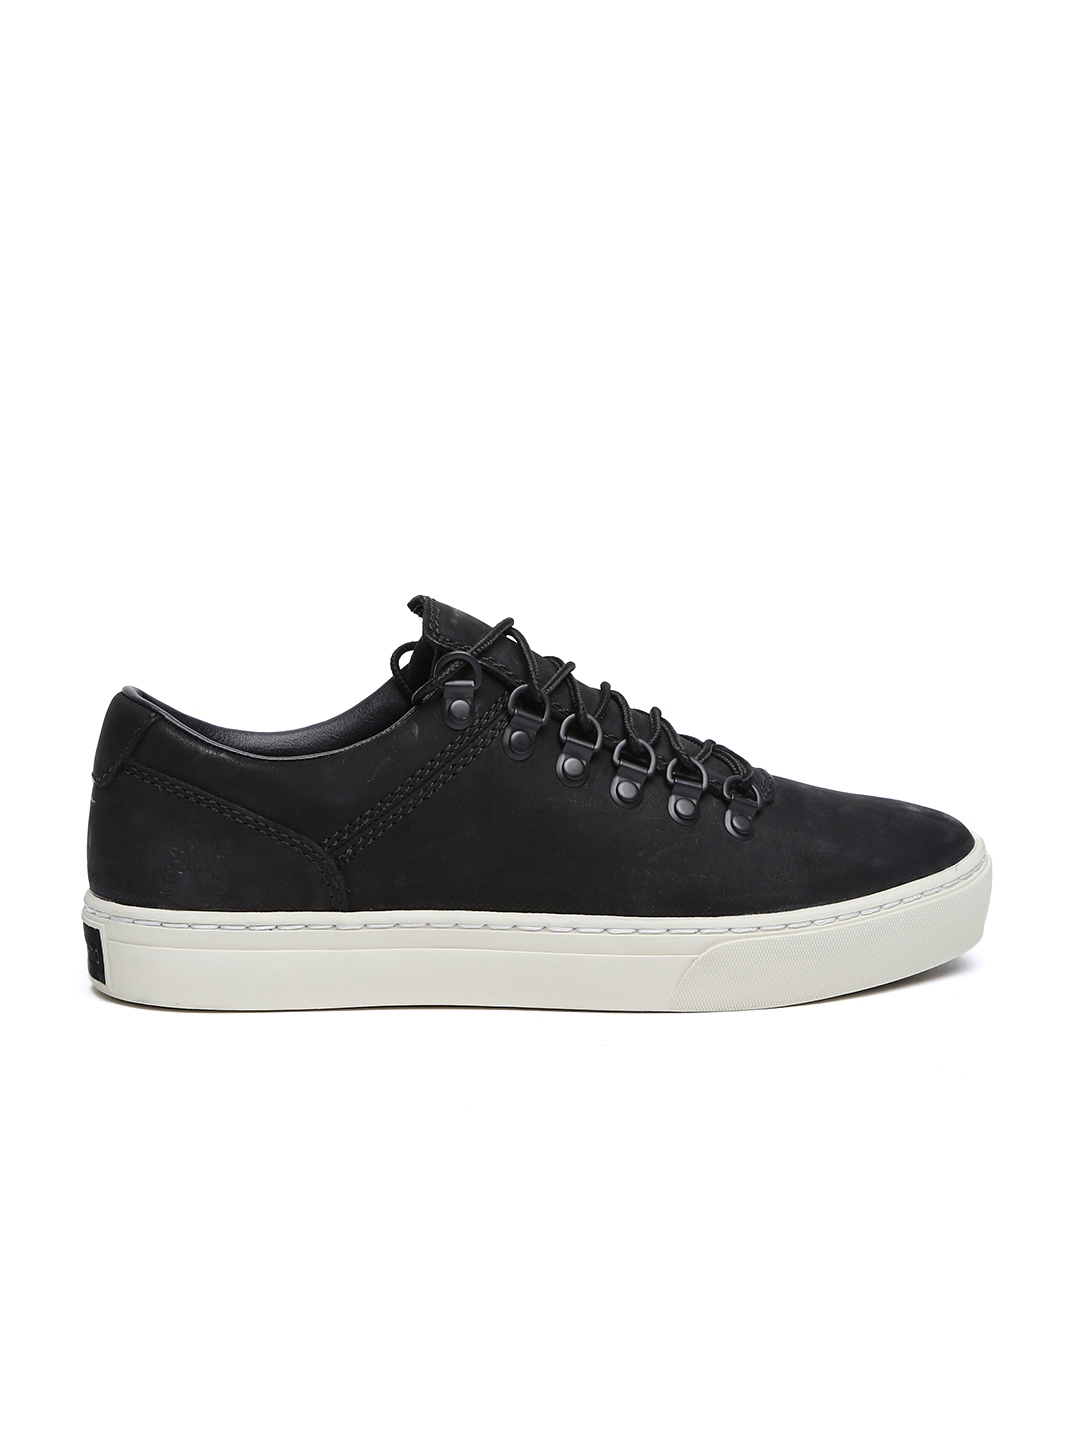 Buy Timberland Men Black Solid Sneakers - Casual Shoes for Men 1557435 ...